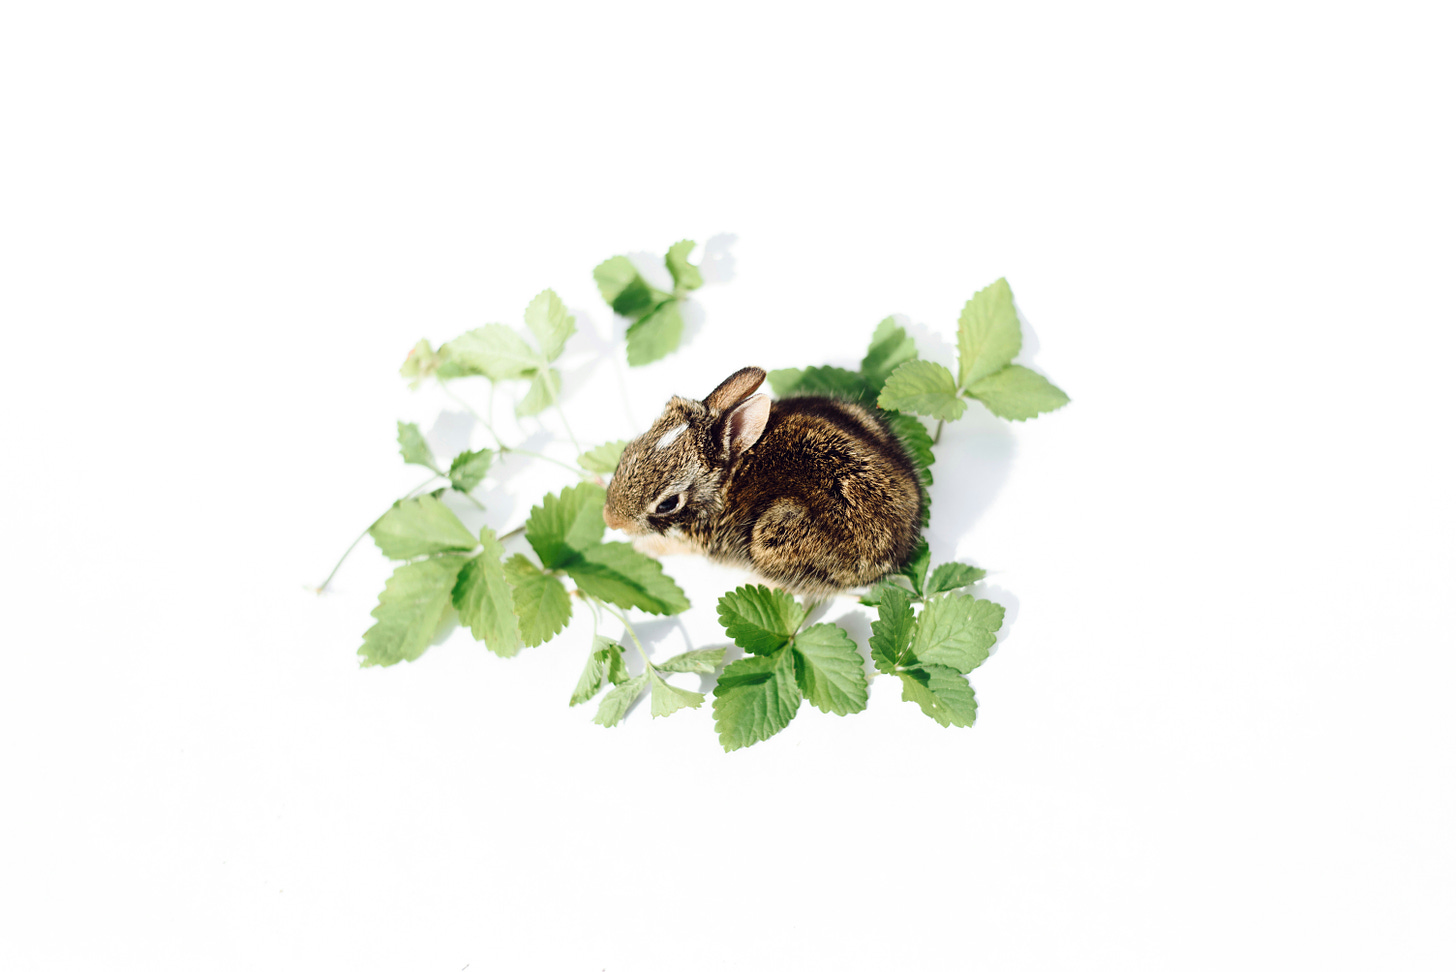 A stylised photo of a brown baby rabbit surrounded by green herbal leaves